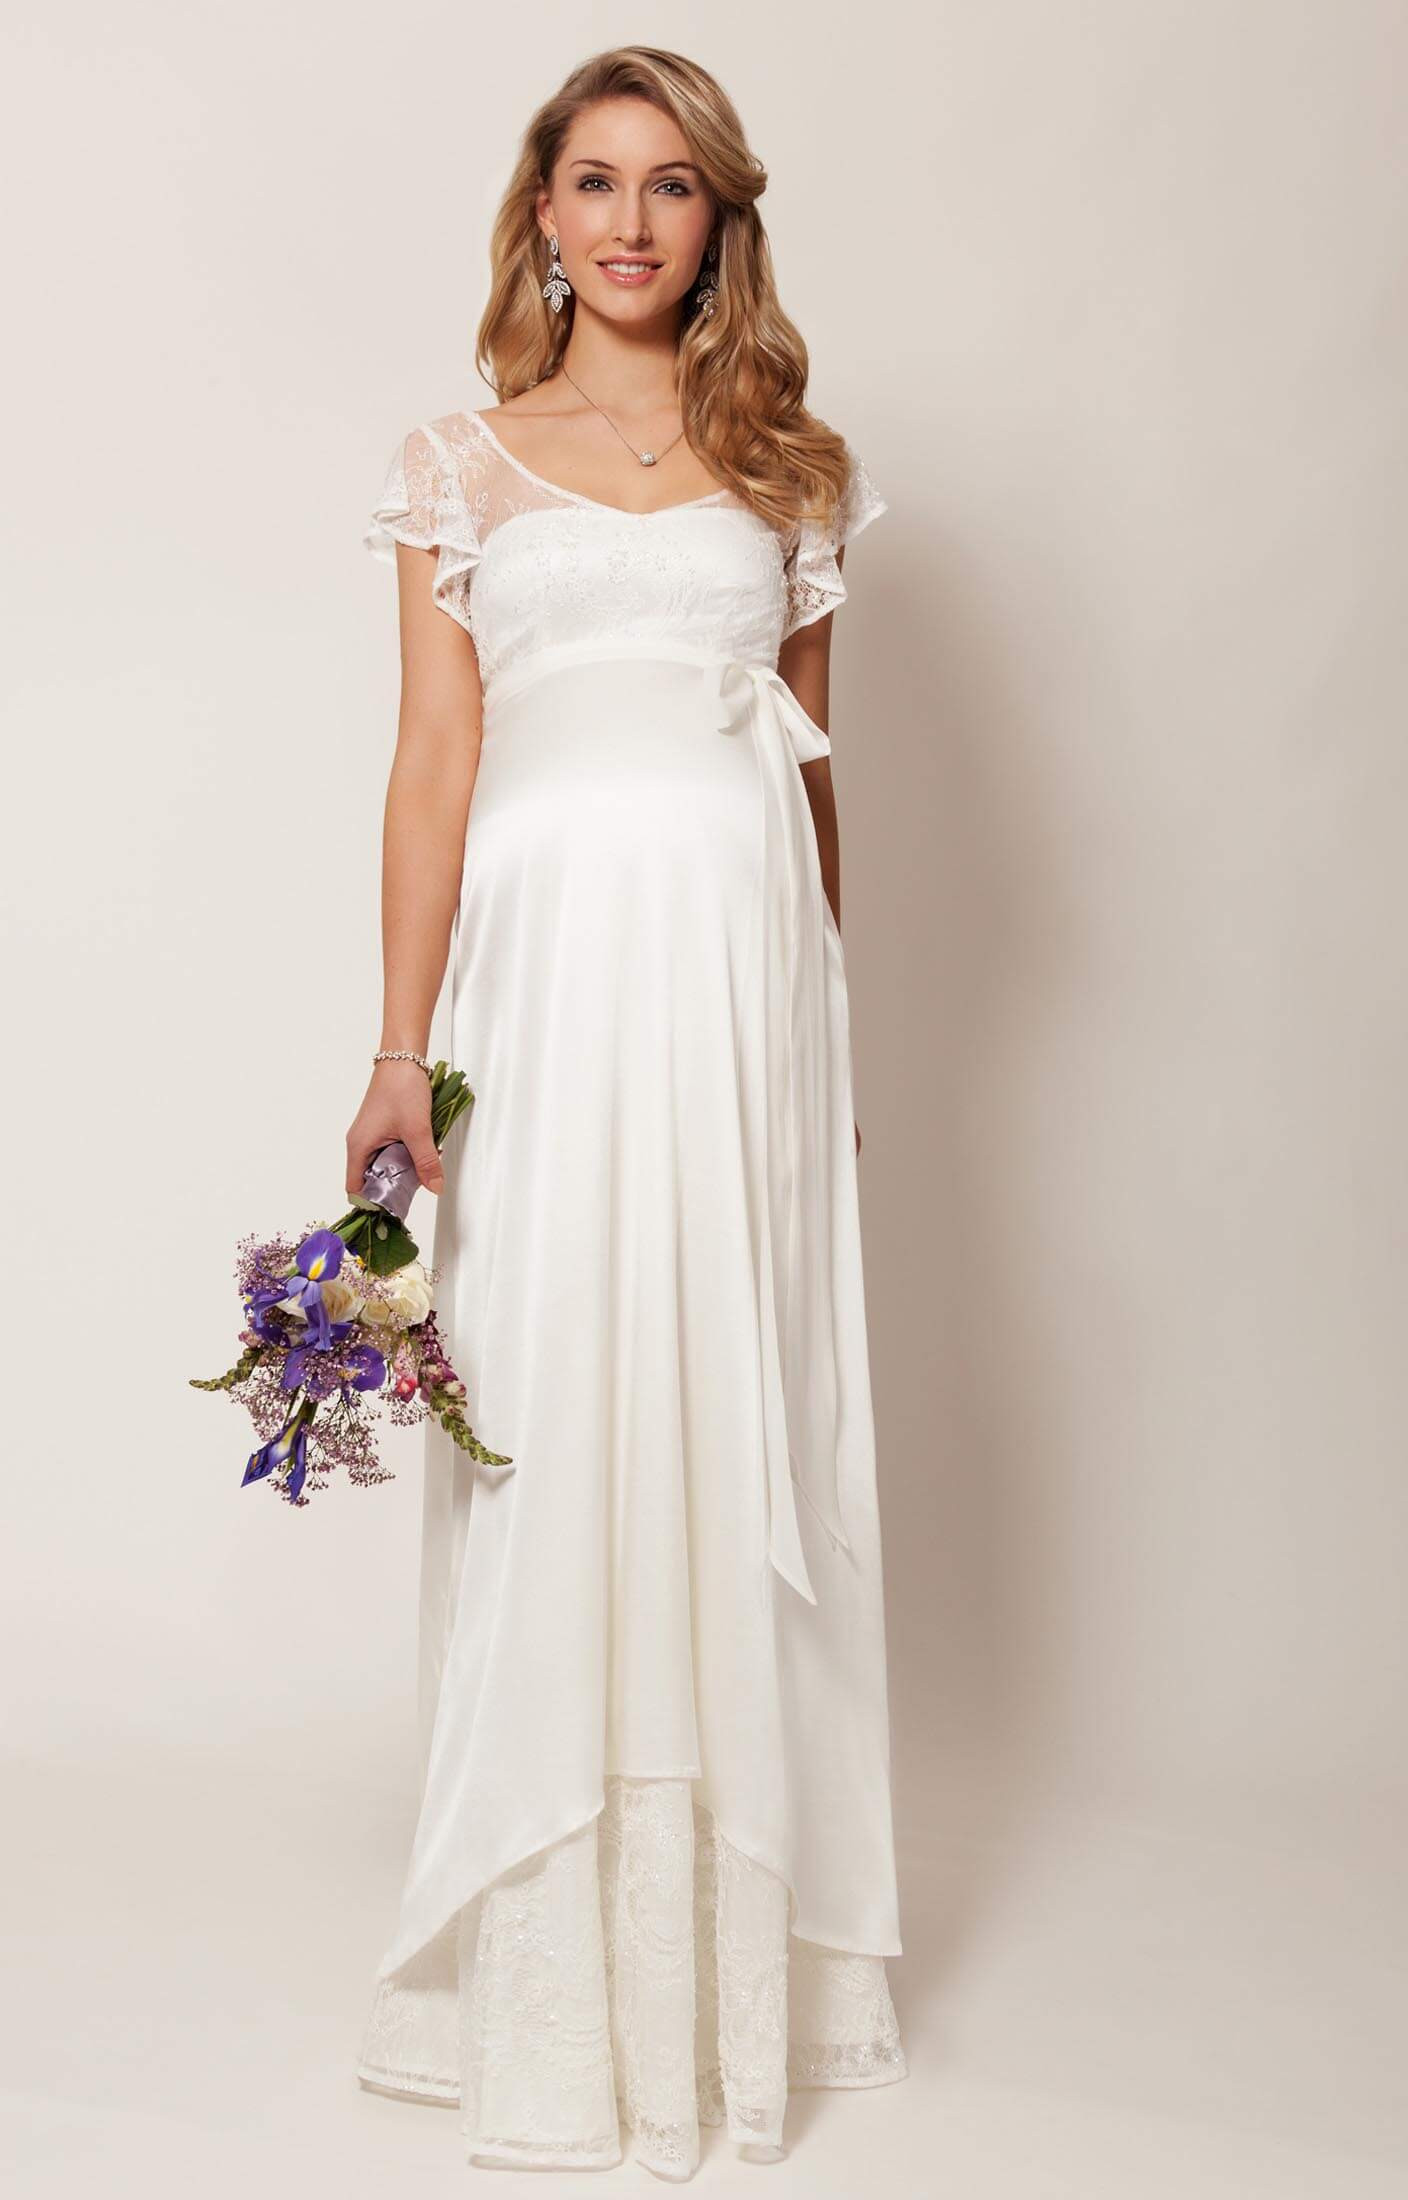 Maternity Wedding Gowns
 Juliette Maternity Wedding Gown Ivory